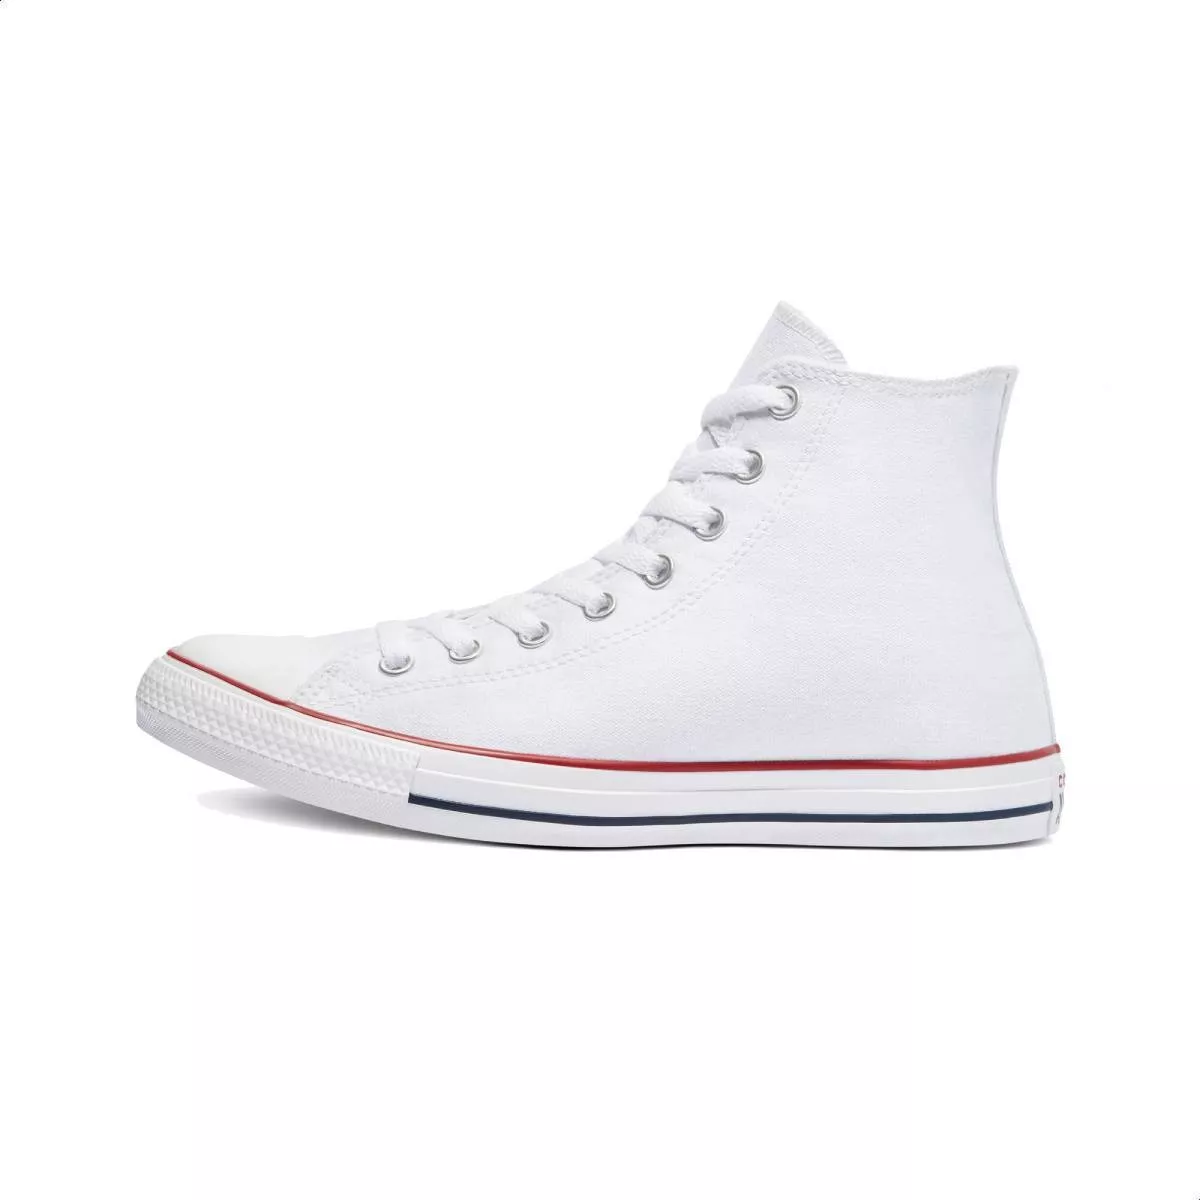 Tenis Sin Género Converse All Star Chuck Taylor Classic High Top Color Optical White - Adulto 4.5 Us